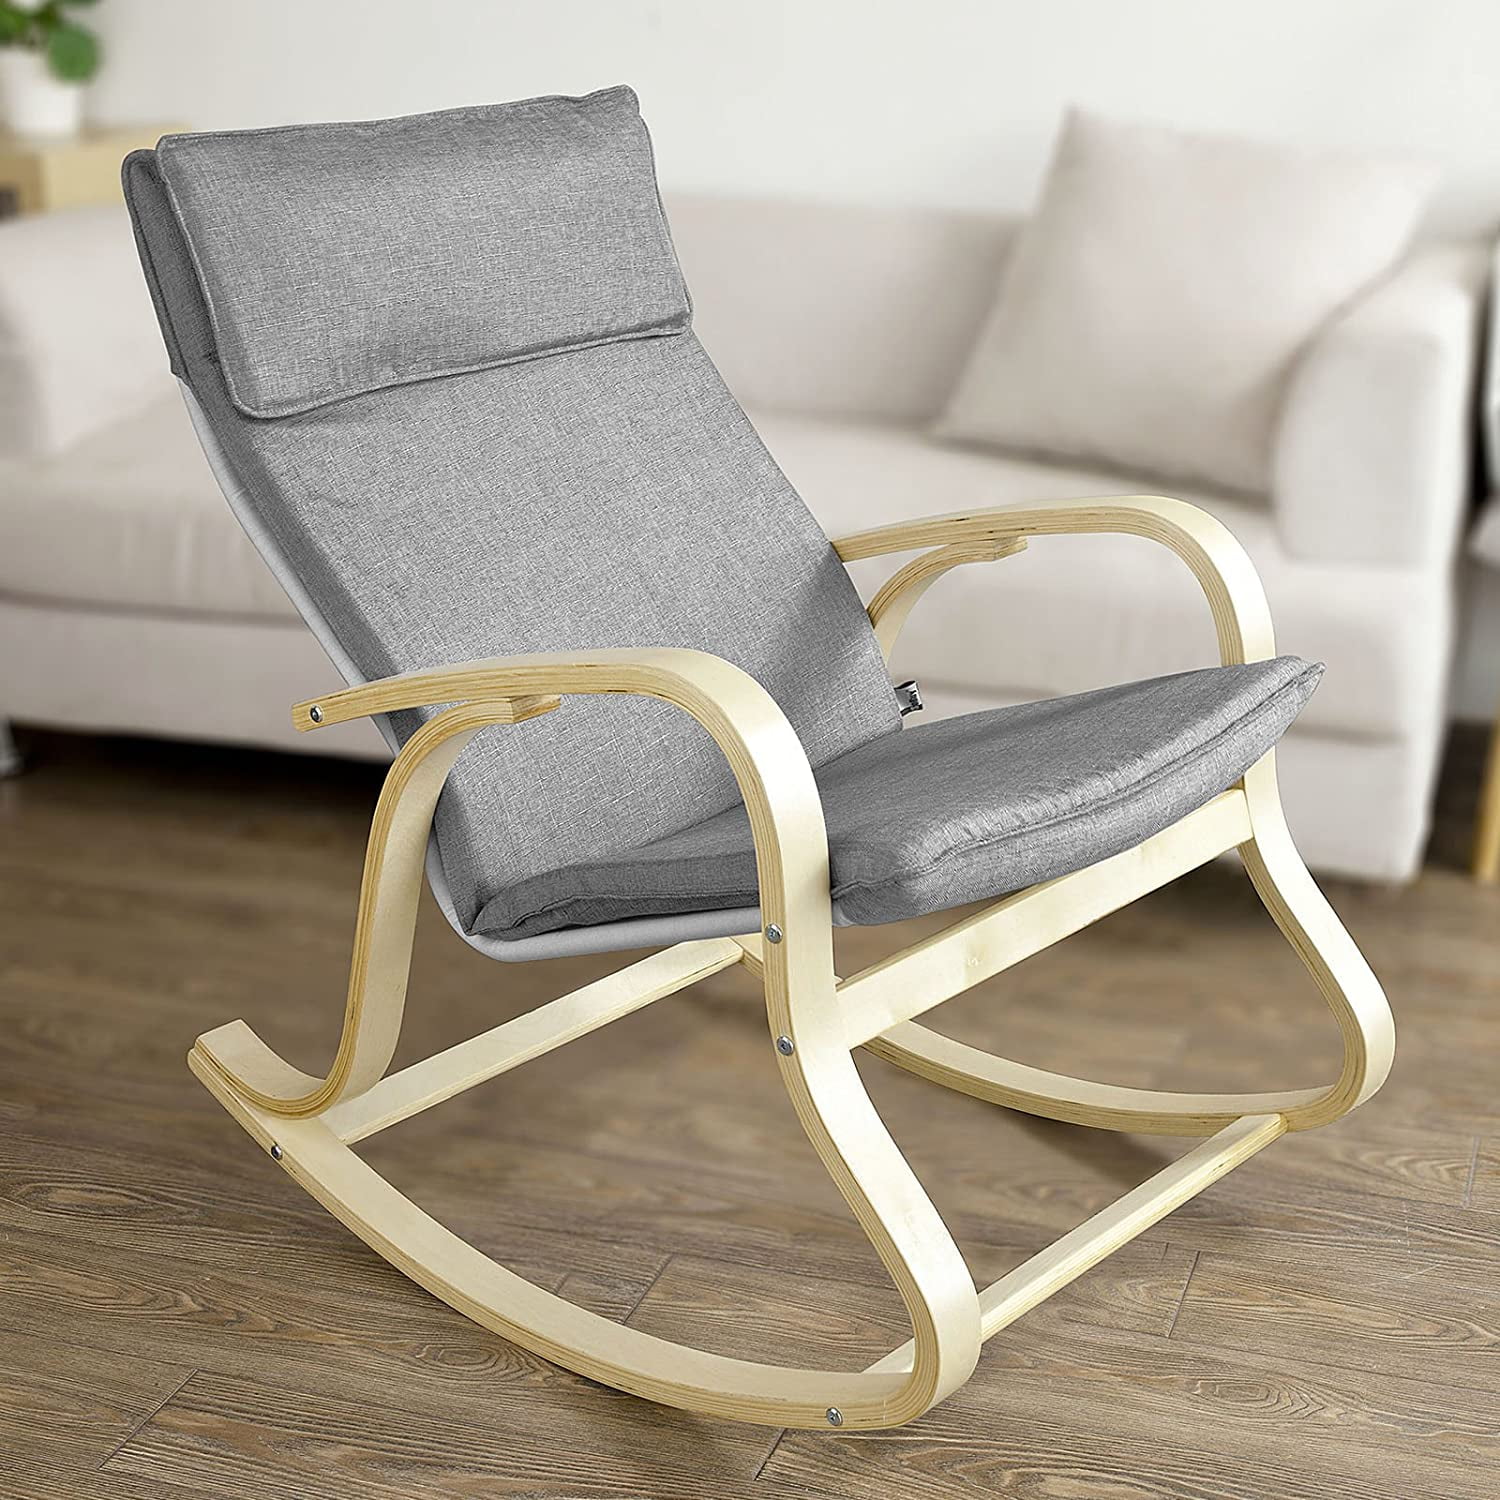 Haotian FST15-DG Lounge Chair Relax Chair with Cotton Fabric Cushion Comfortable Relax Rocking Chair 